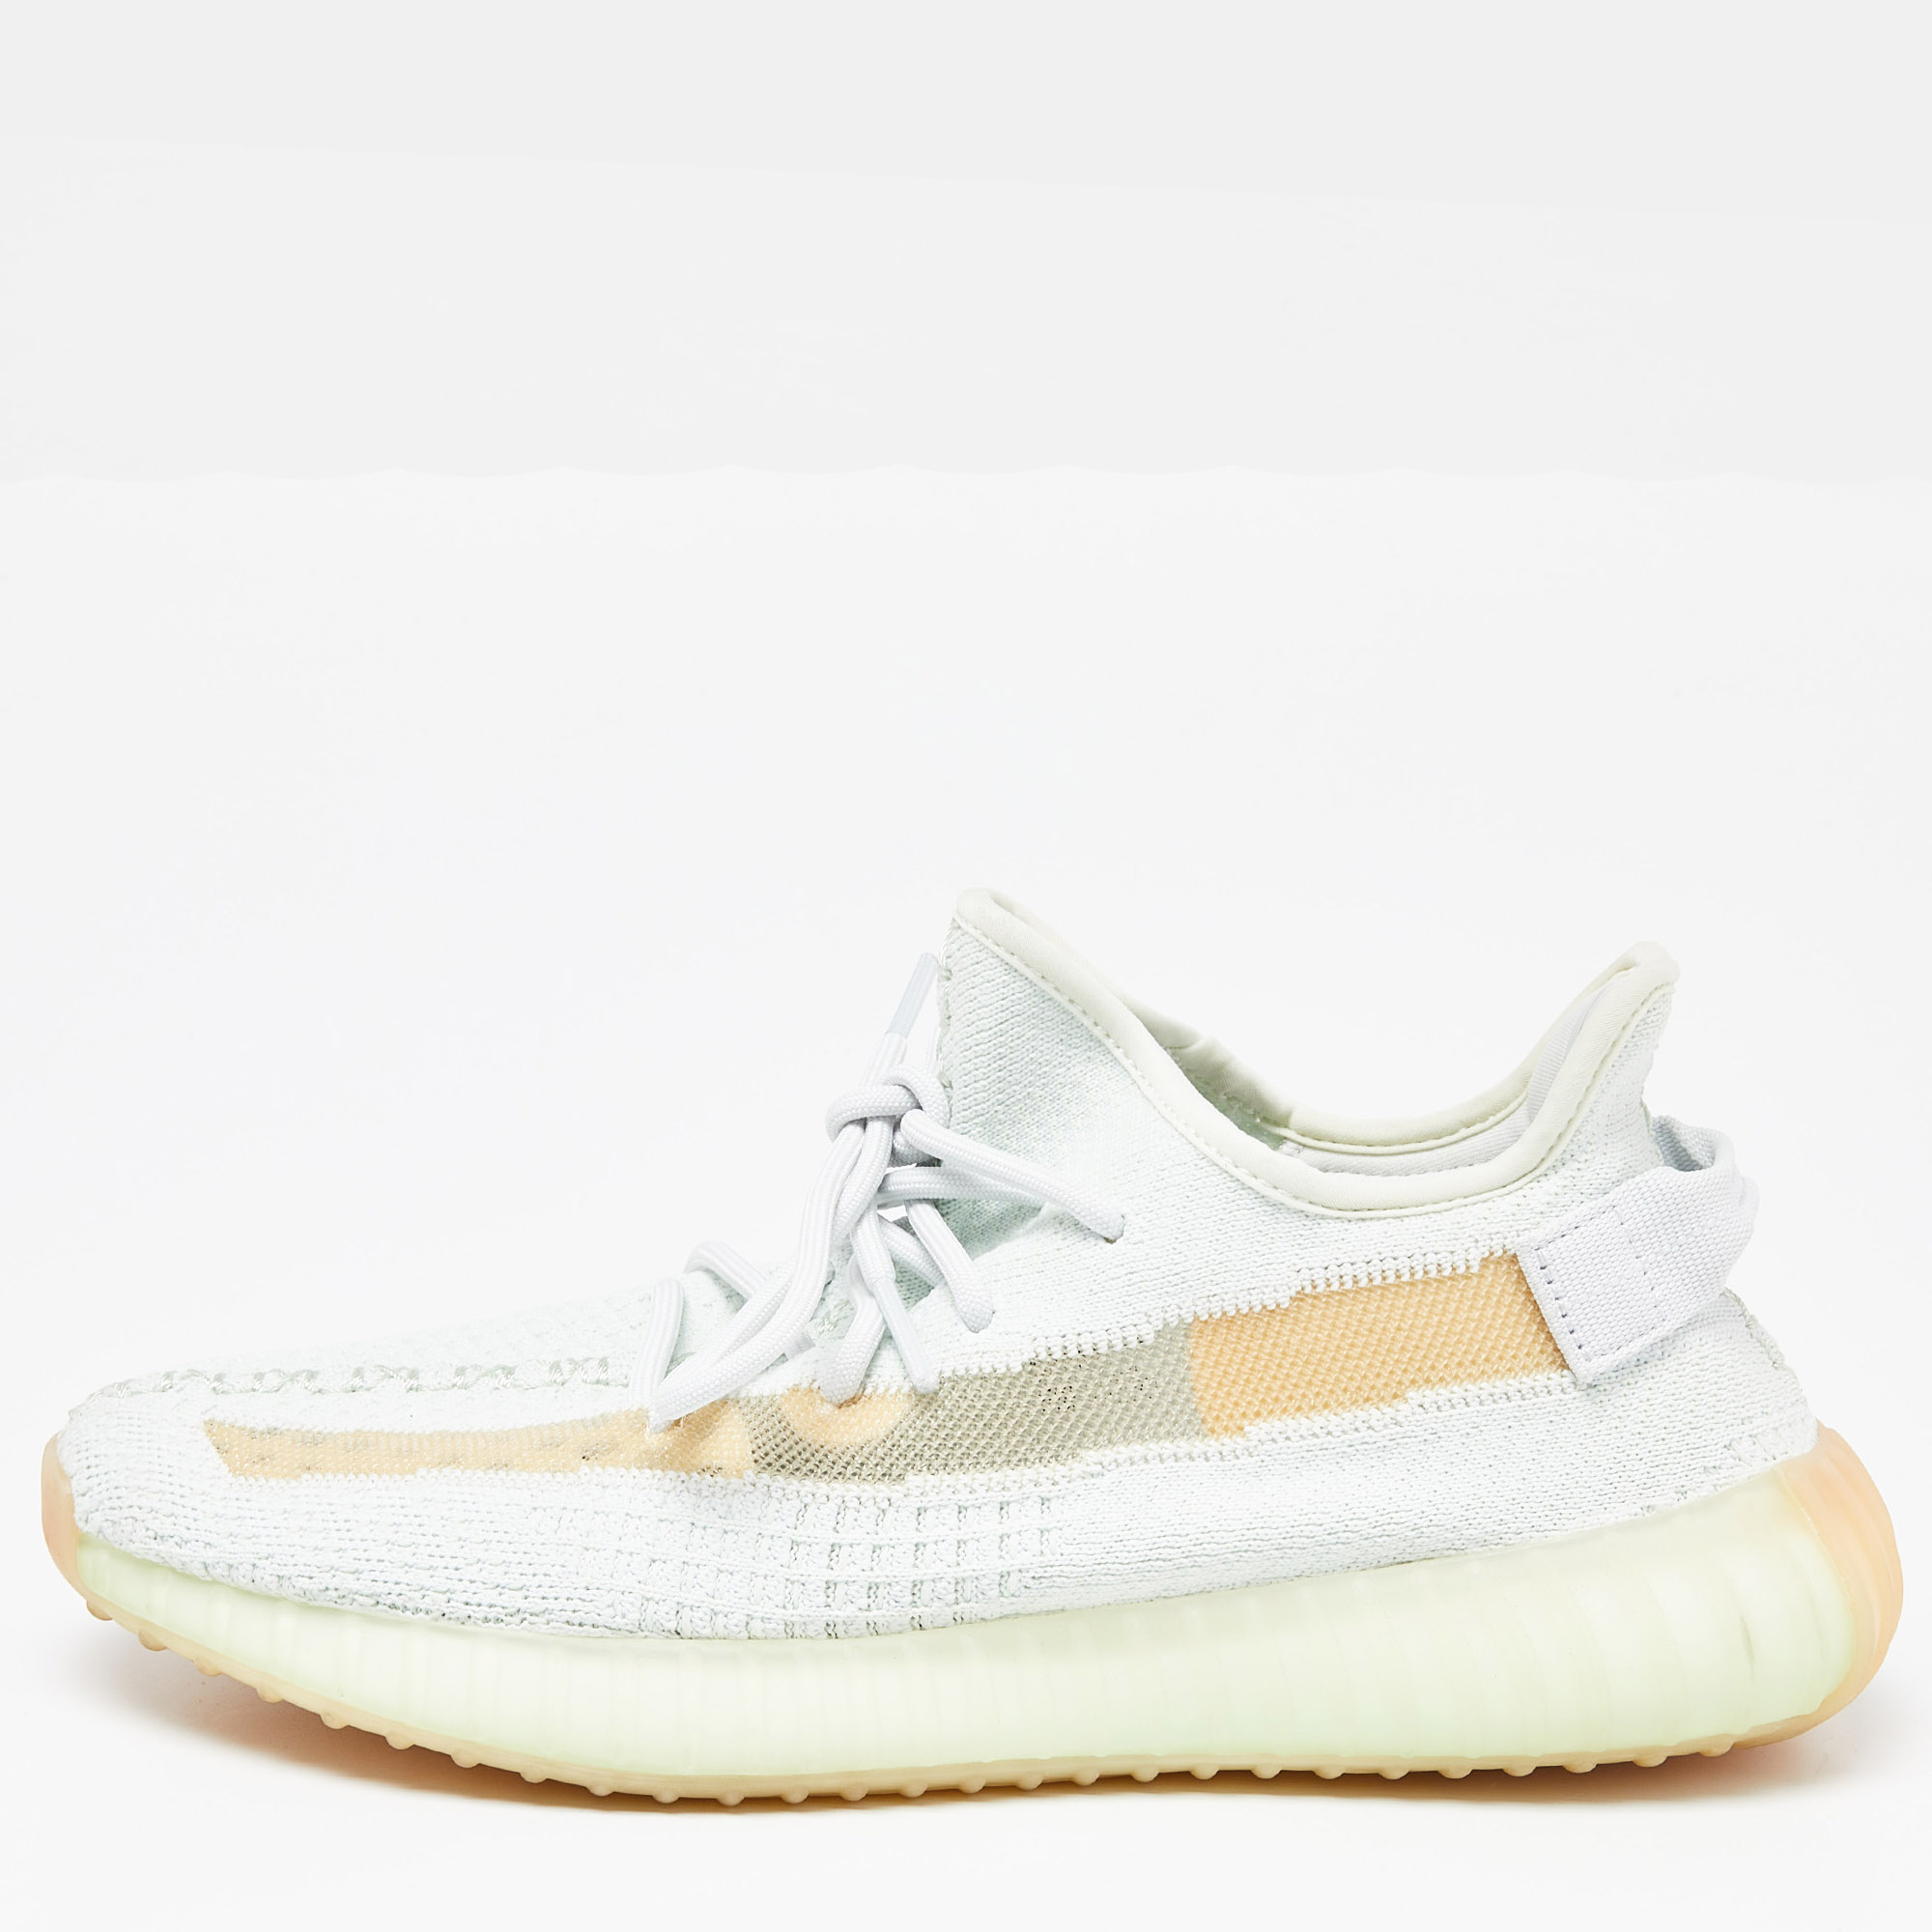 Pre-owned Yeezy X Adidas Mint Green Knit Fabric Boost 350 V2 Hyperspace Sneakers Size 42 2/3